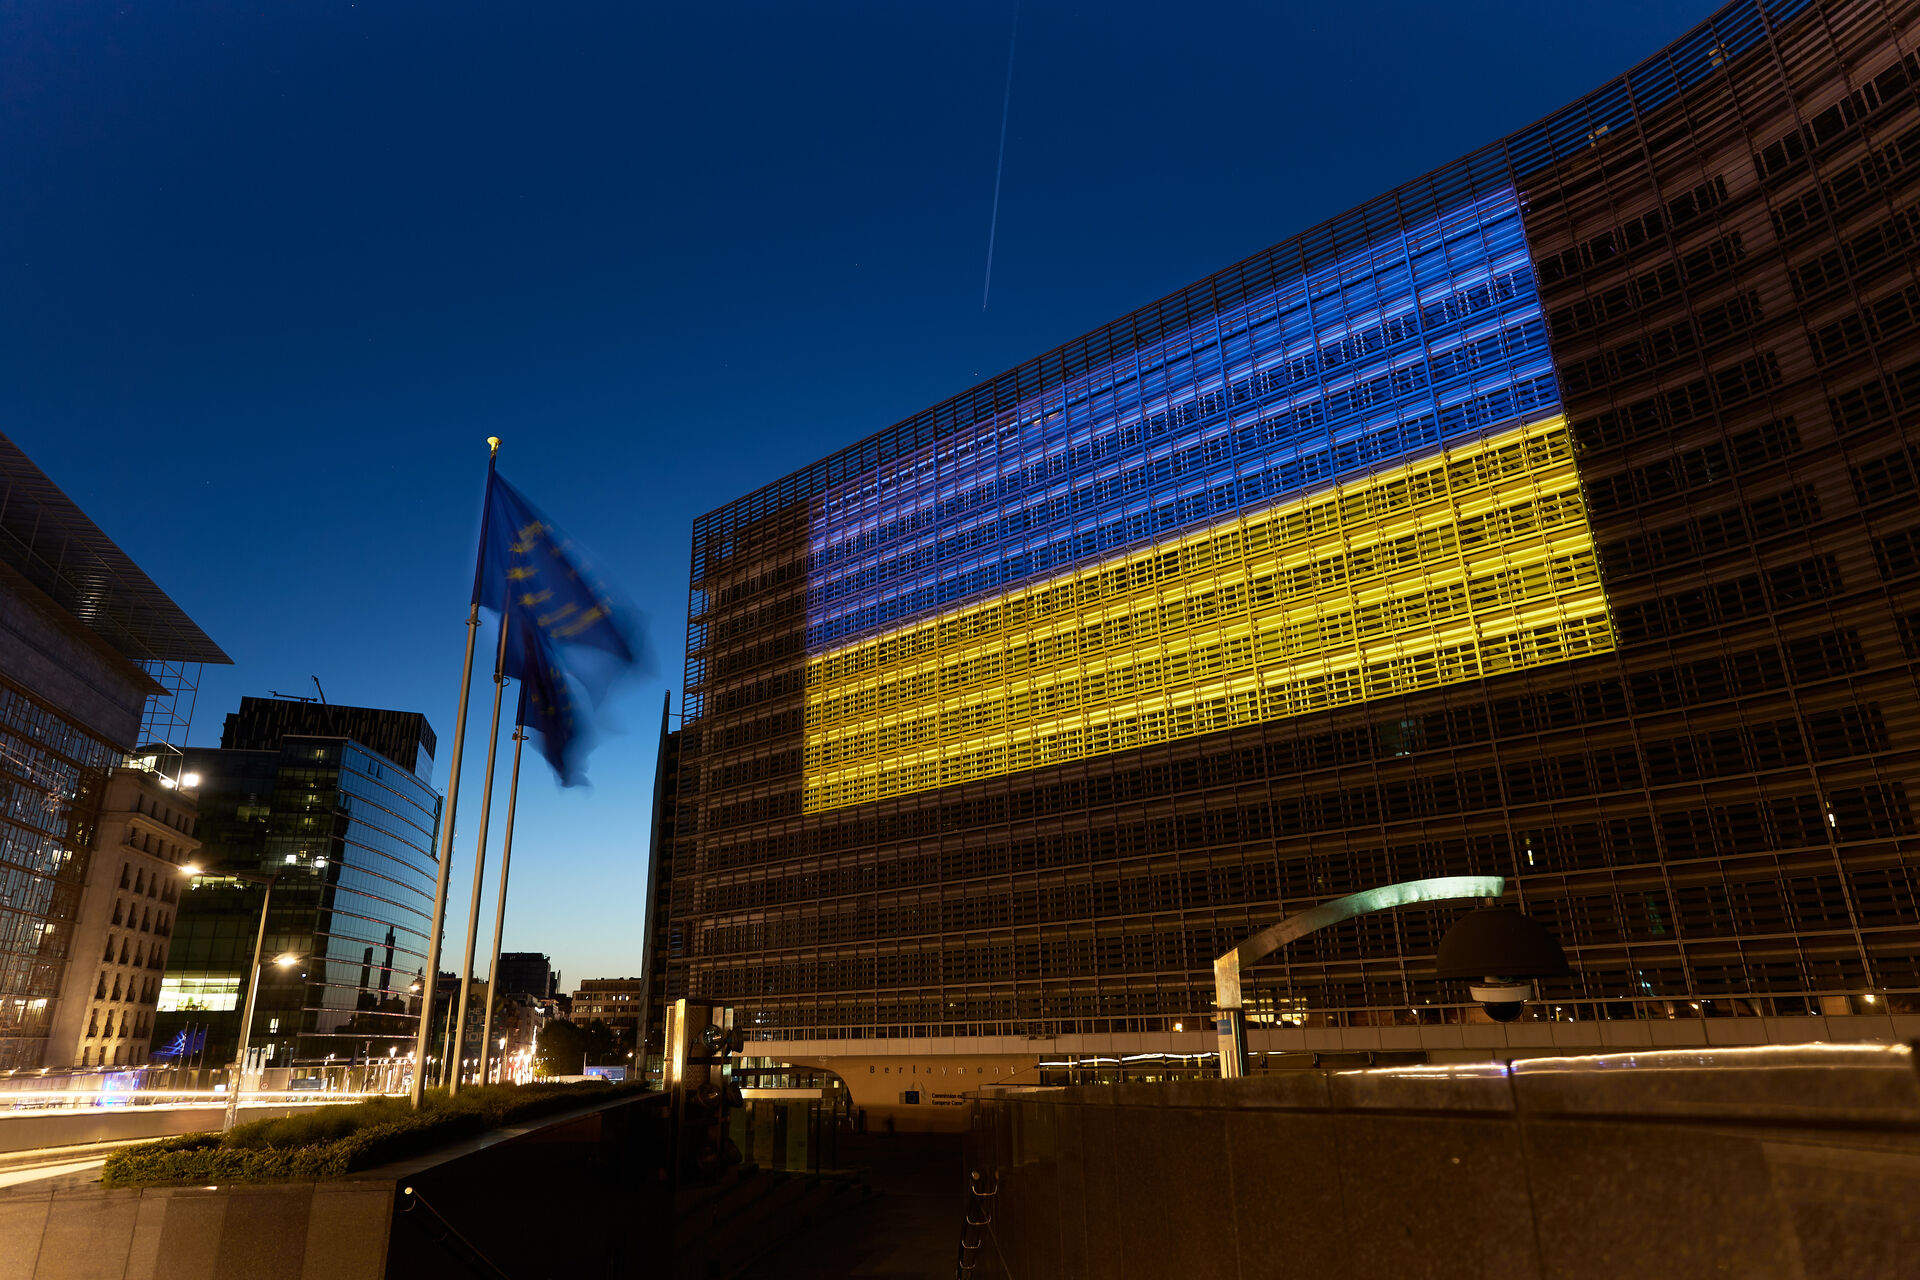 On 8 May 2022, the Berlaymont building was illuminated in blue and yellow to show EU support for Ukraine following Russia's military aggression against Ukraine